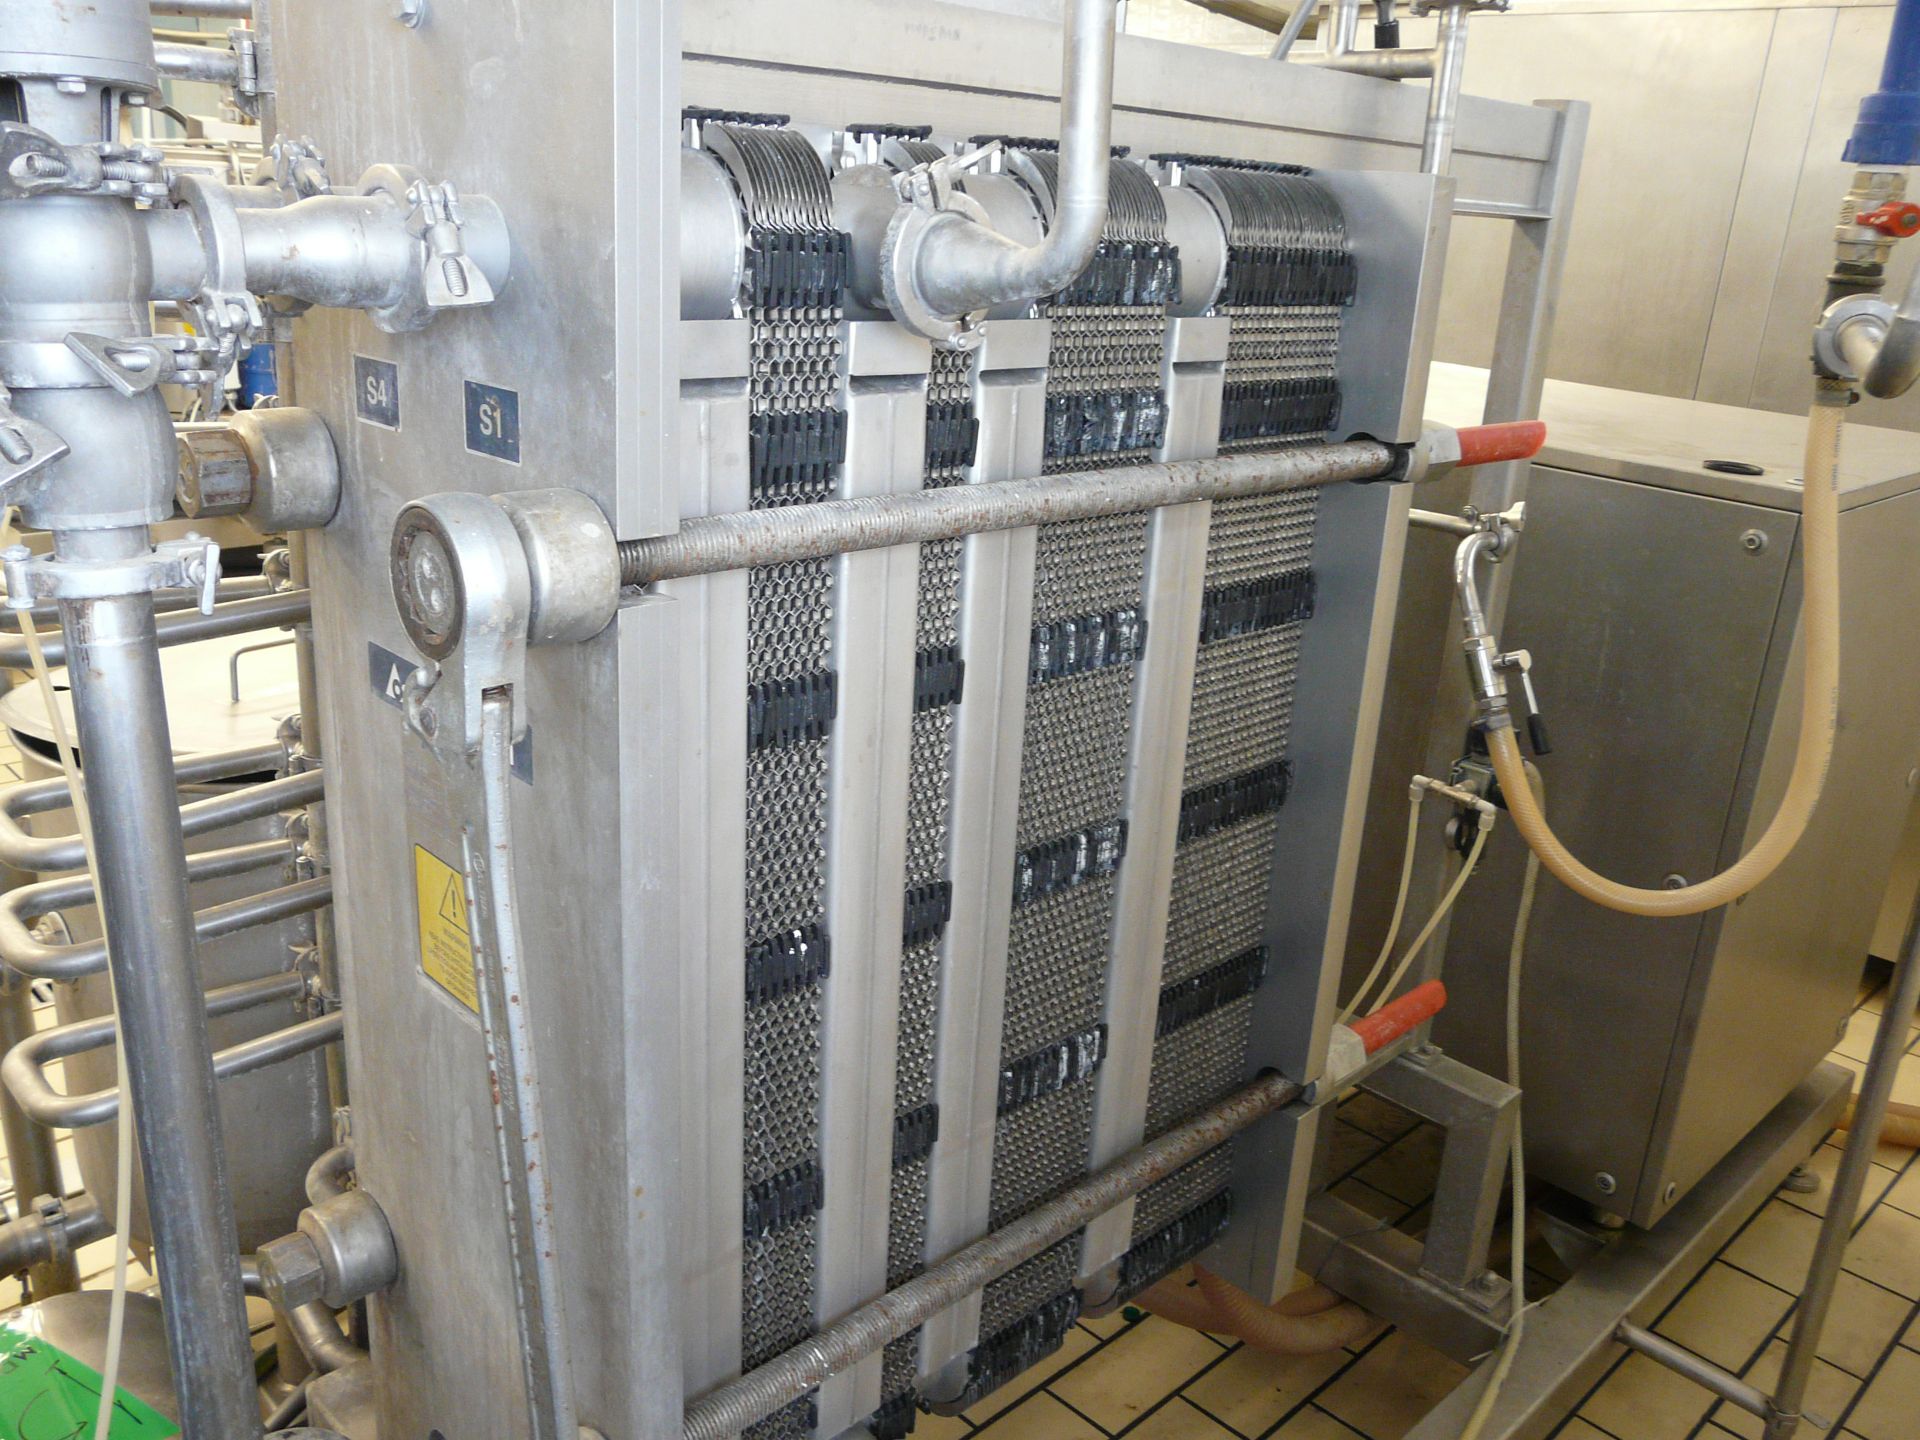 English: TETRA PAK HOYER HTST SYSTEM, 1200 Pasteurizer for Ice Cream, Contains 2 x Tanks with - Image 23 of 45